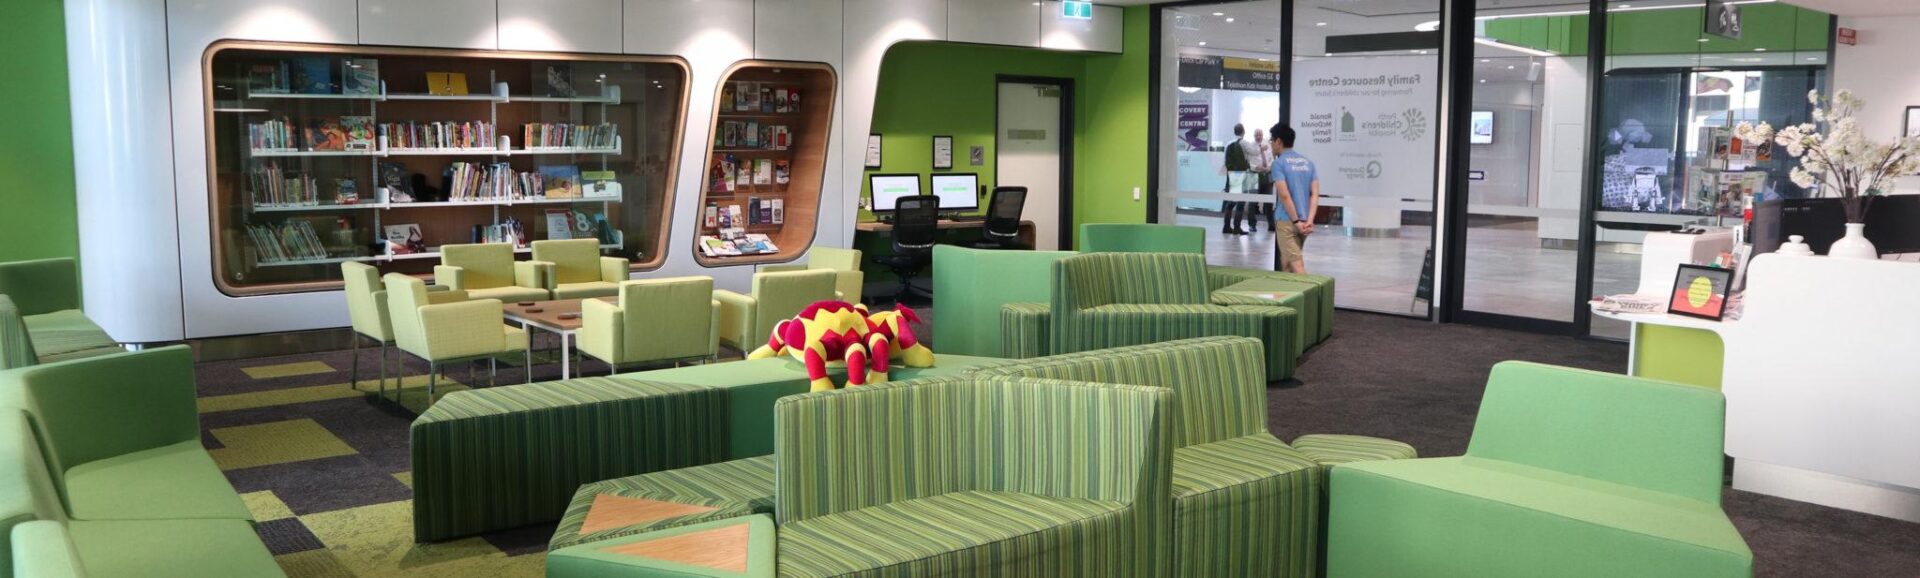 Photo of the Family Room at Perth Children's Hospital